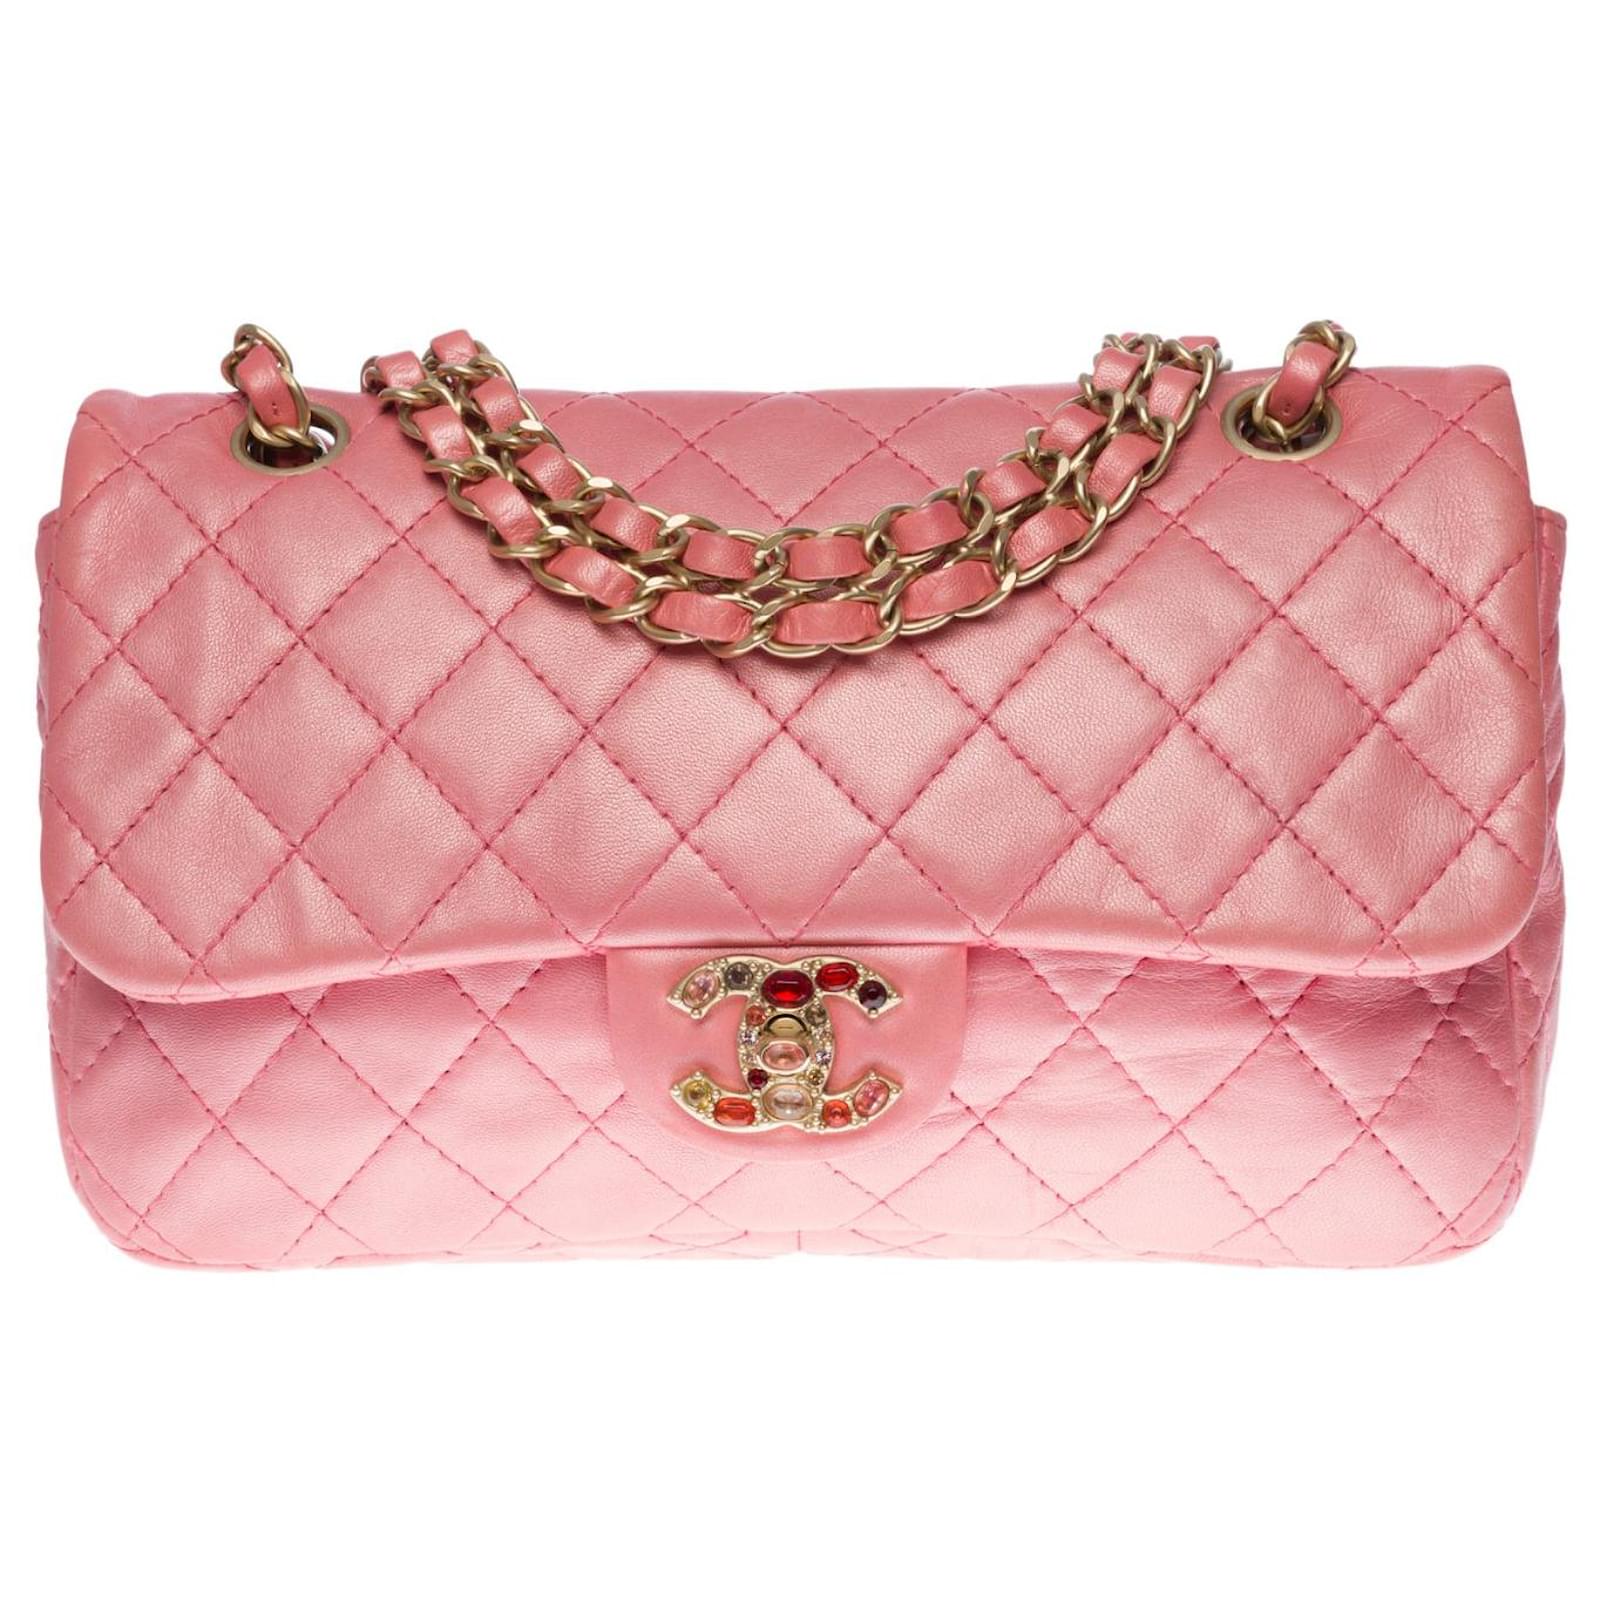 Timeless Chanel Limited Edition Classique Flap bag in metallic